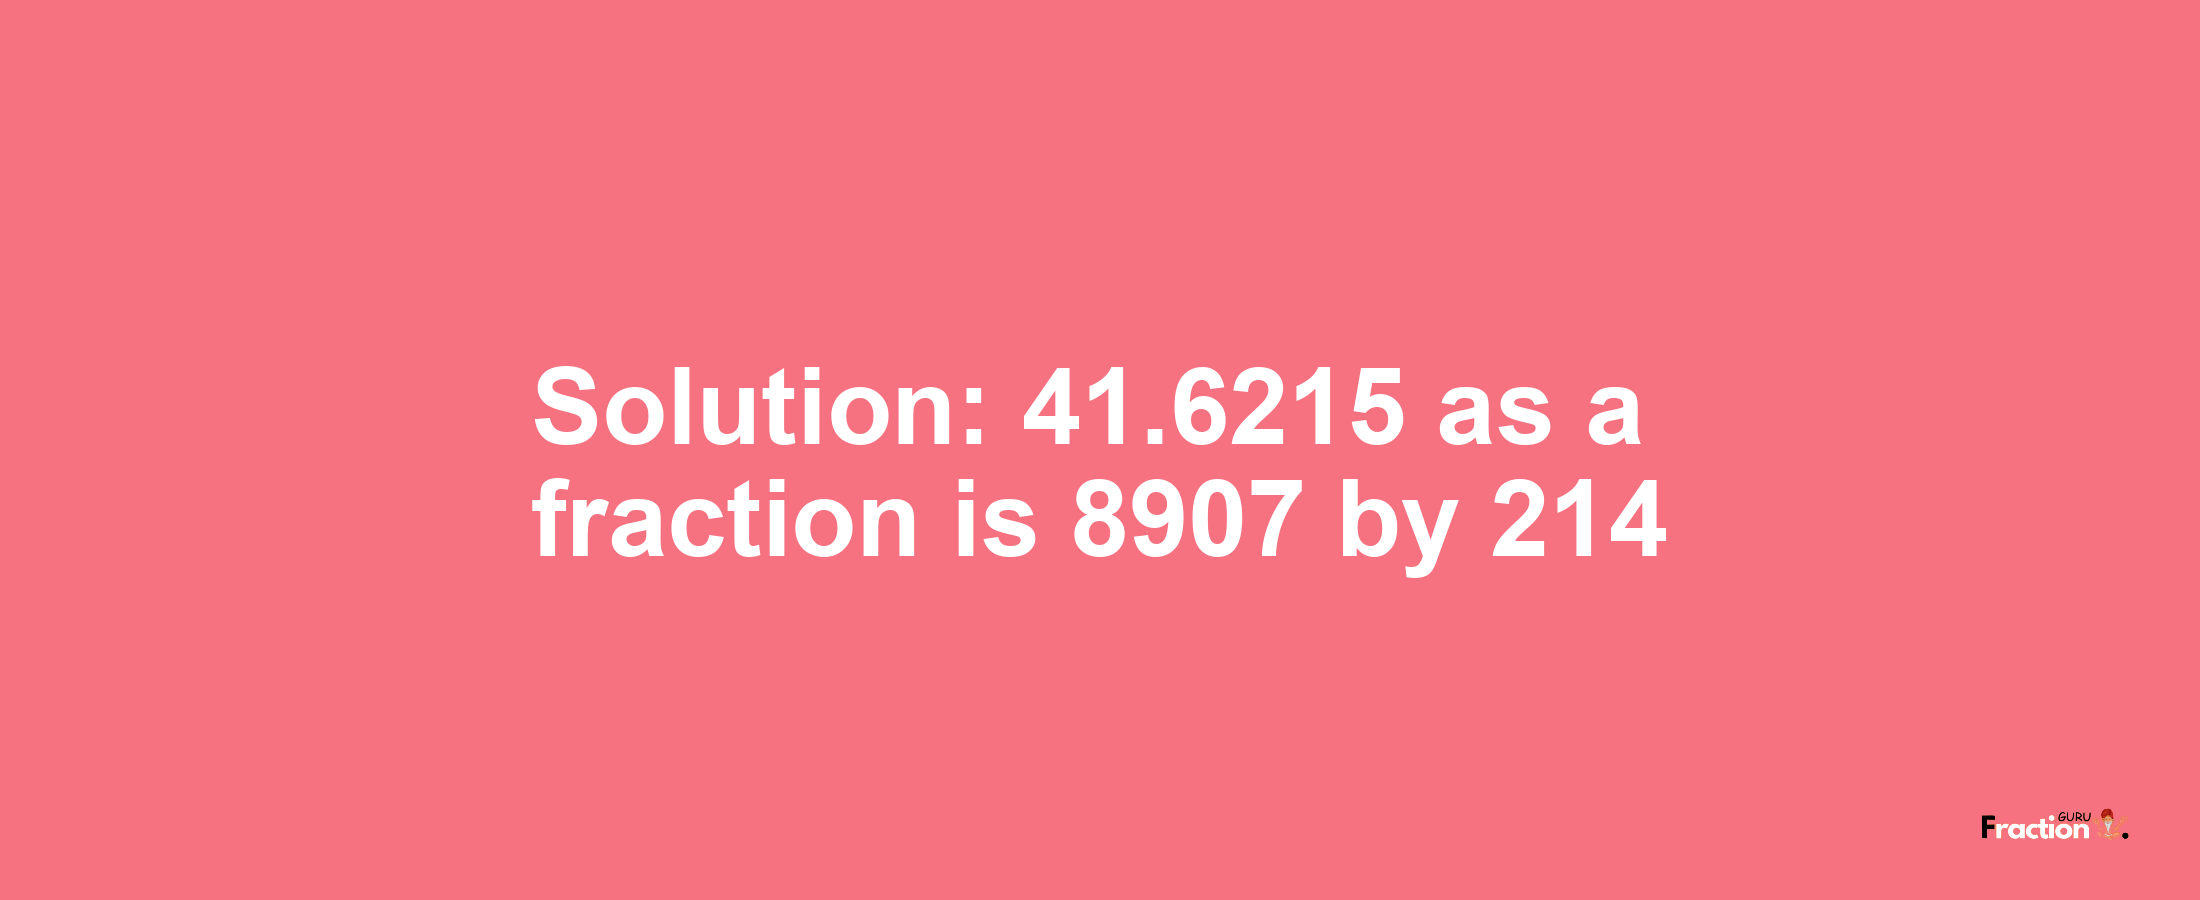 Solution:41.6215 as a fraction is 8907/214